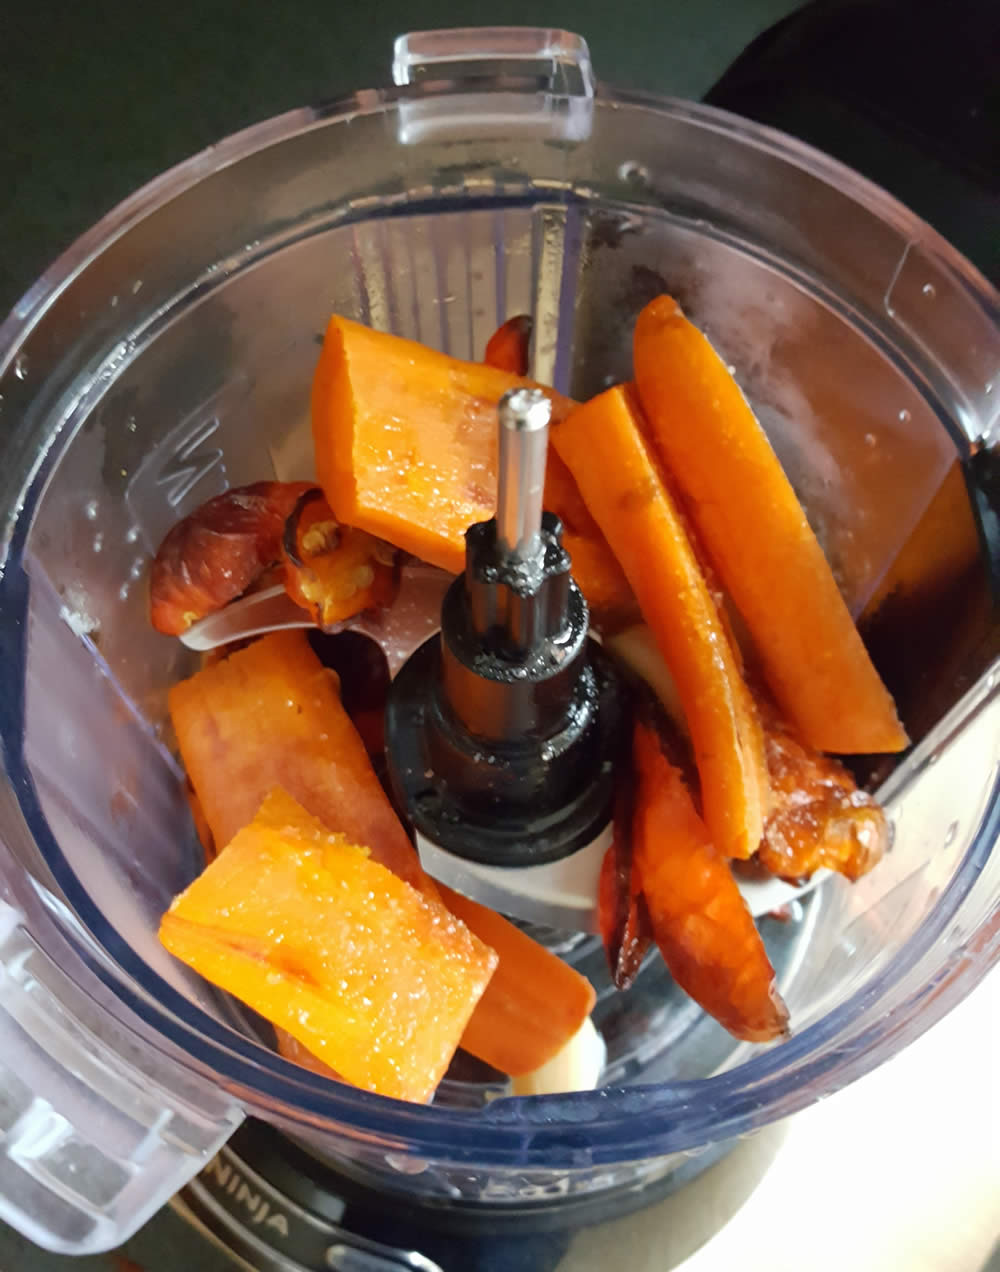 Roasted carrots, garlic and ghost peppers, ready to make sauce.